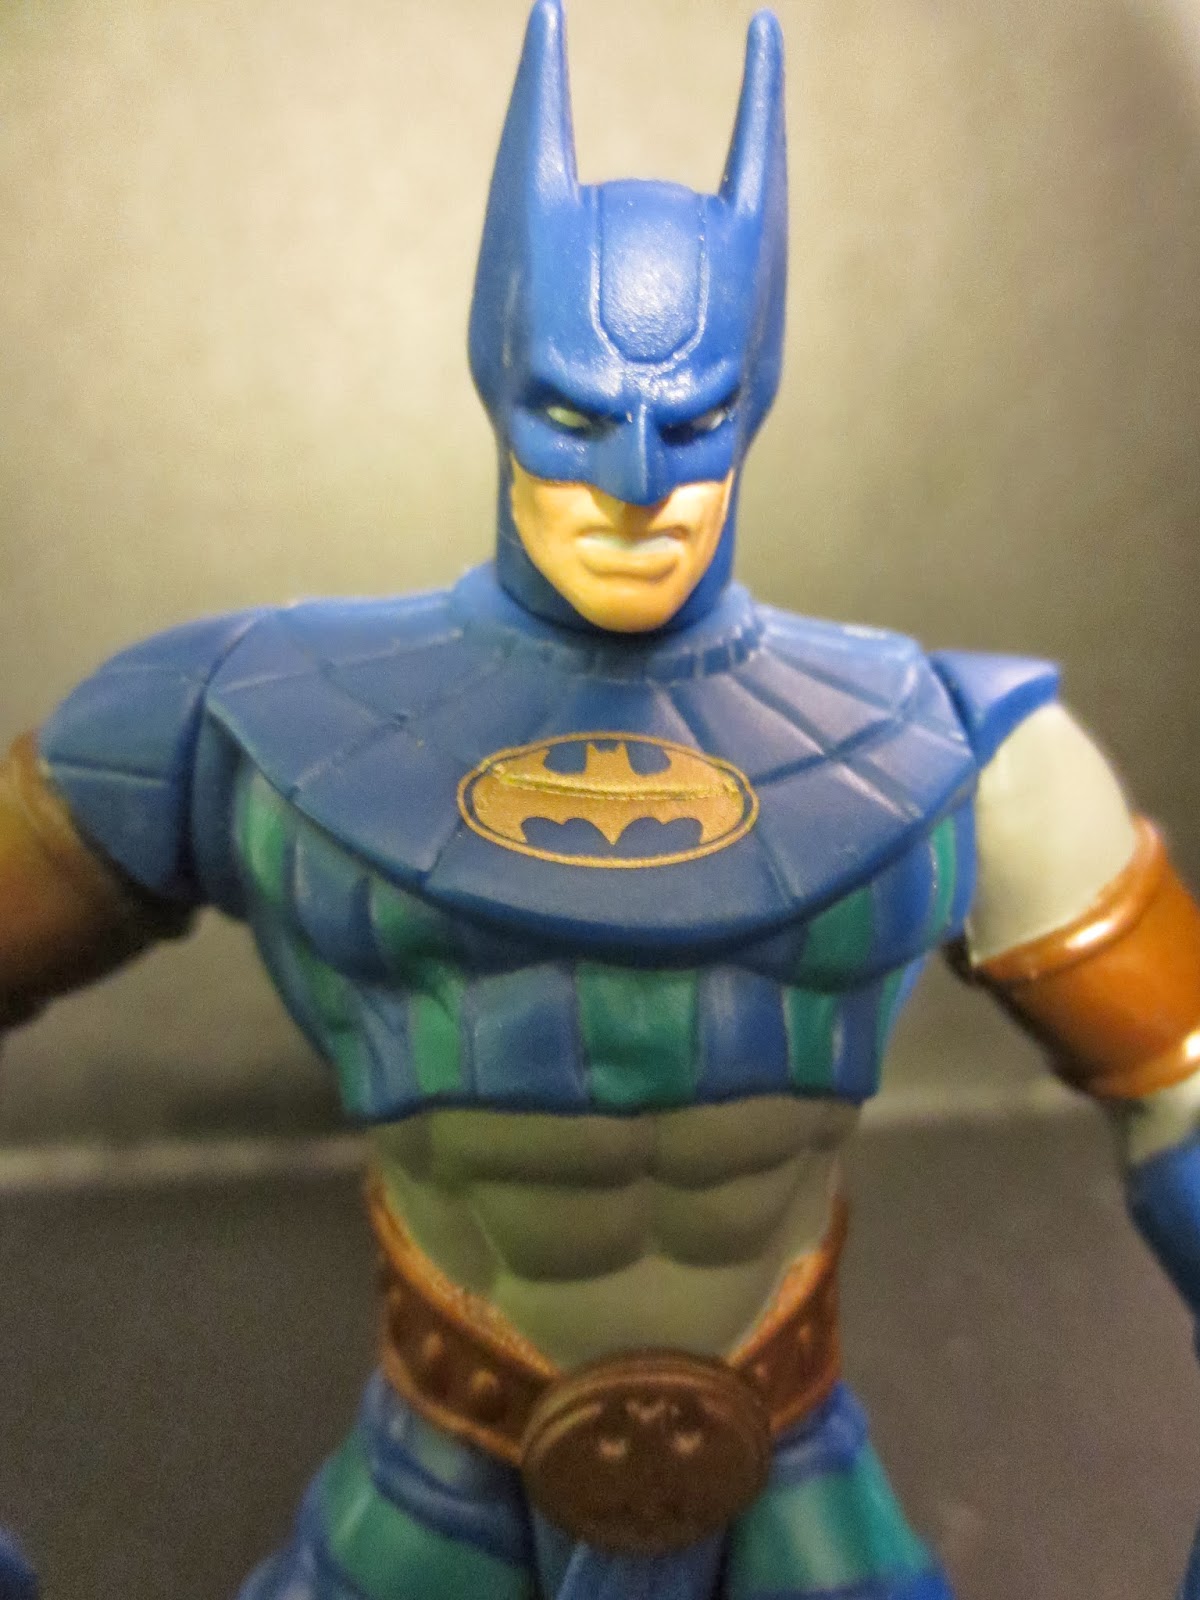 Action Figure Review 90's Edition: Egyptian Batman  Egyptian Catwoman from  Legends of the Dark Knight by Kenner